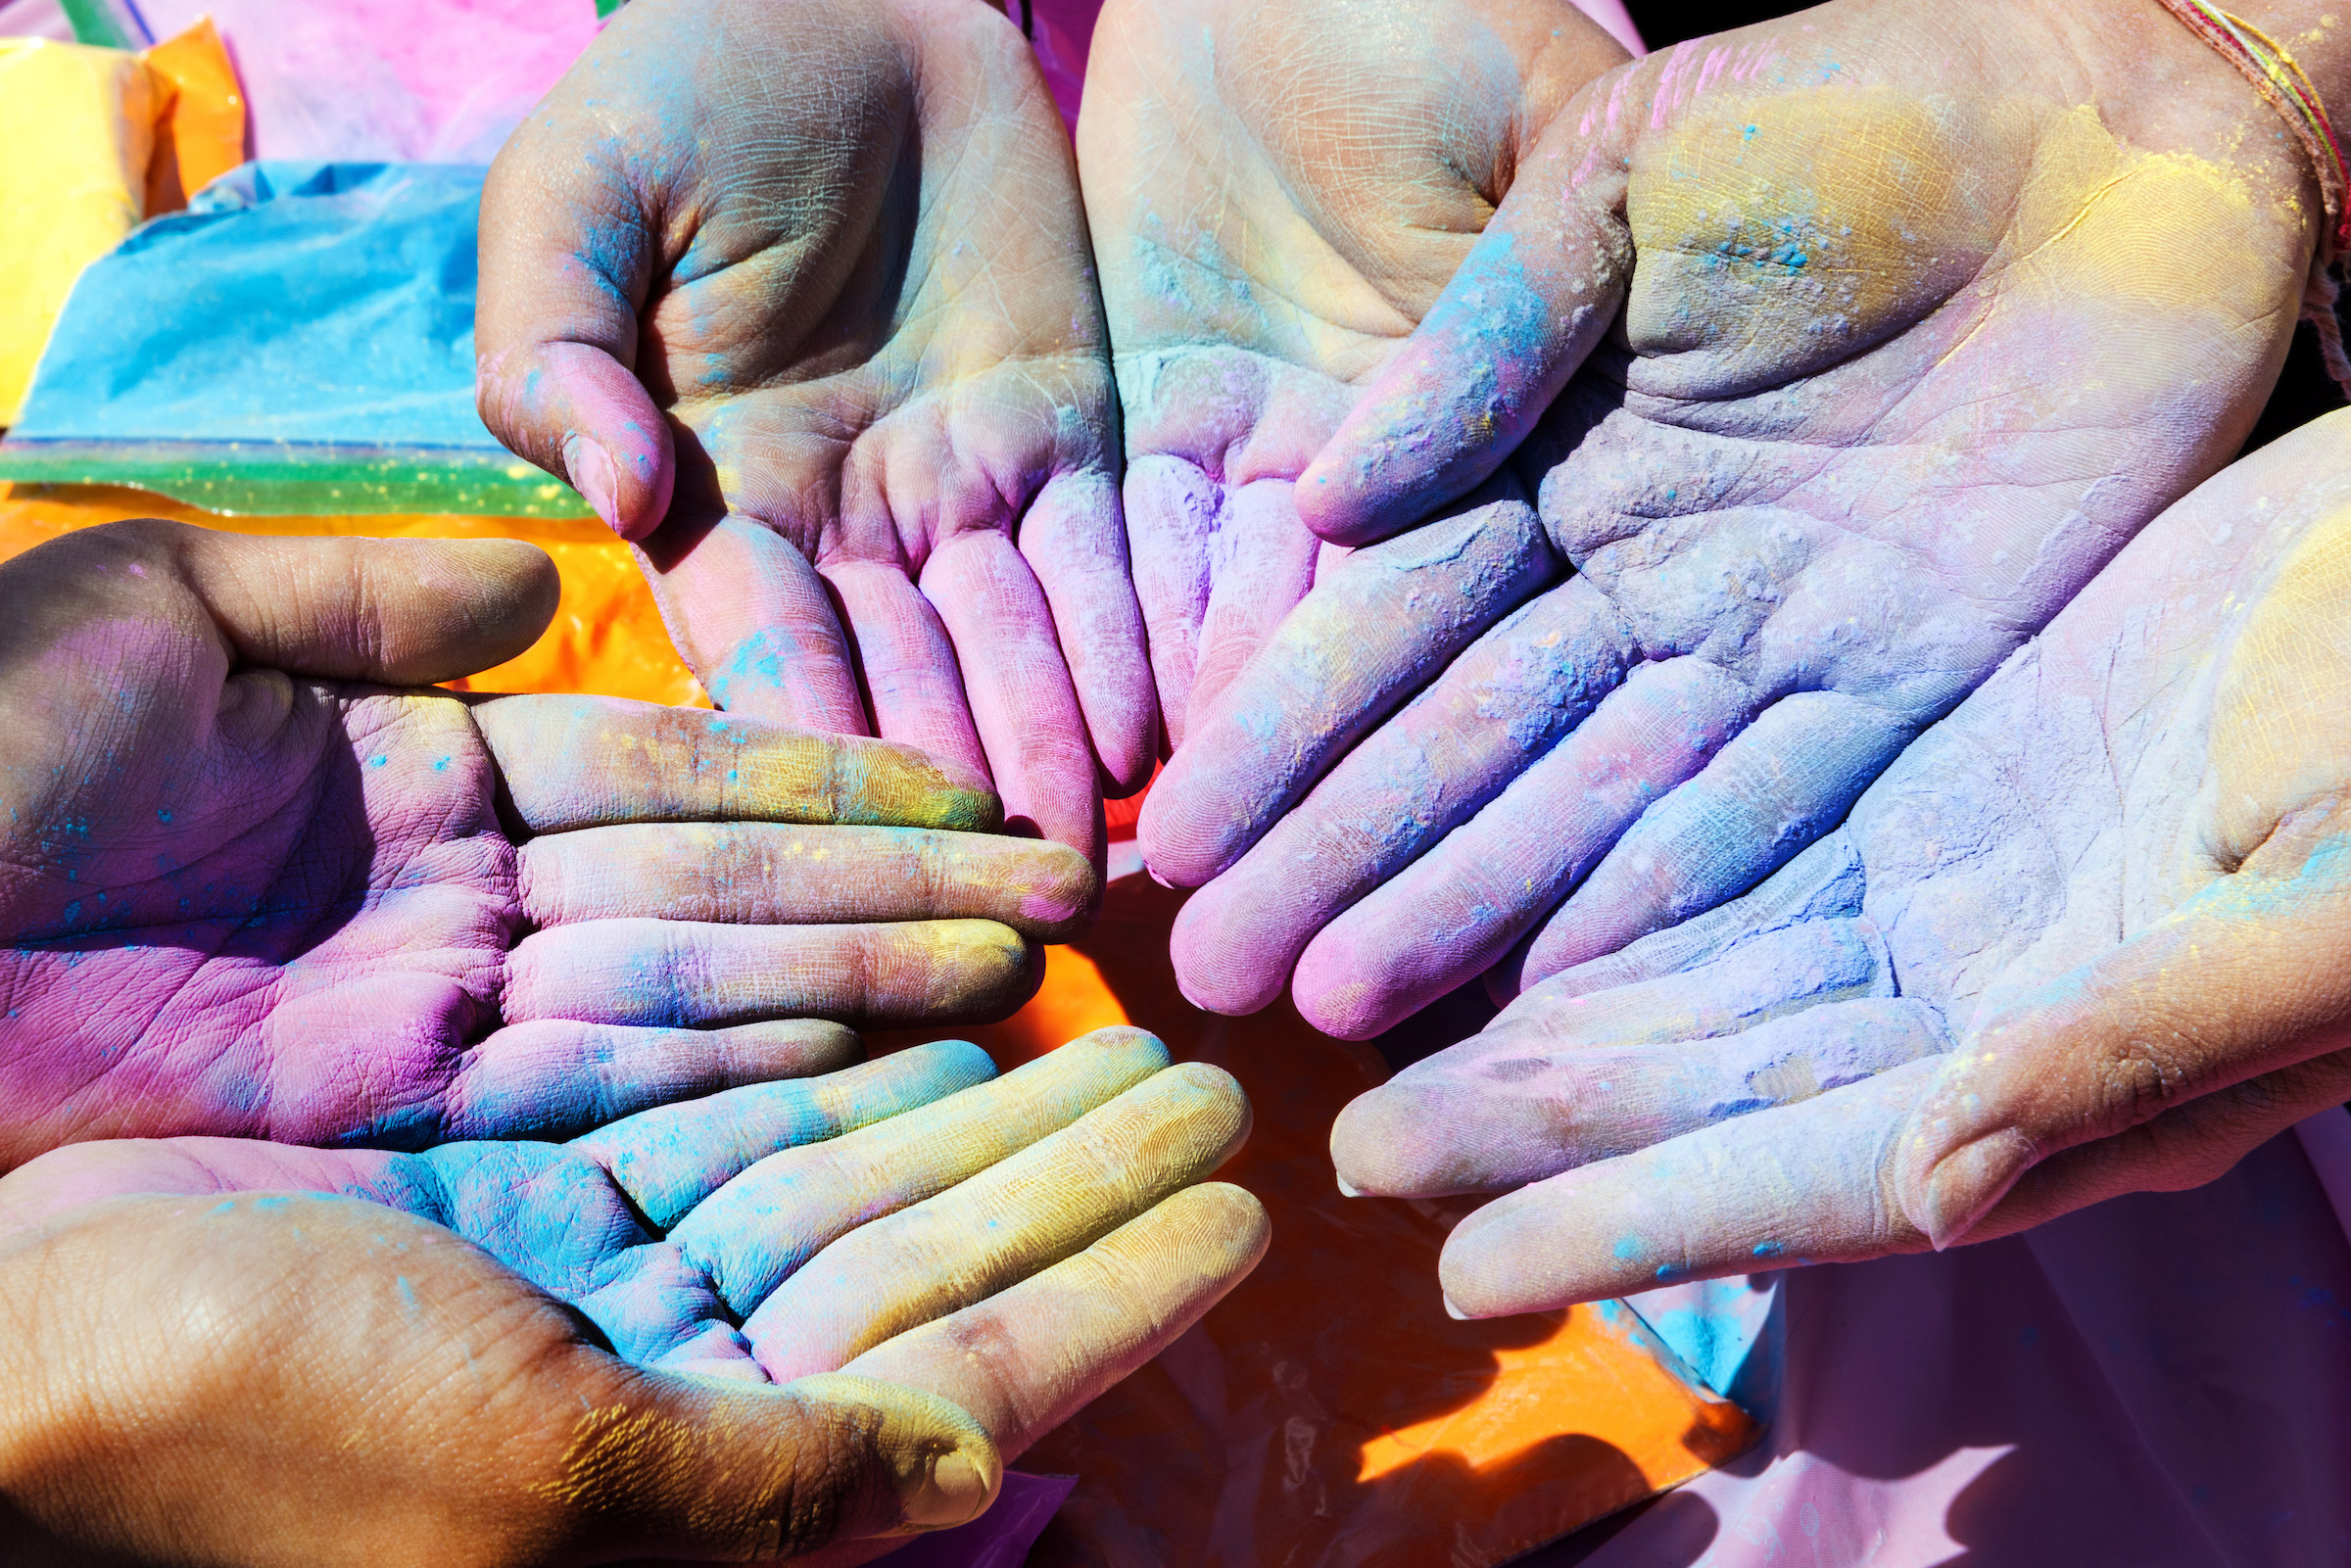 Several individuals holding together the palms of their hands covered in different colors.